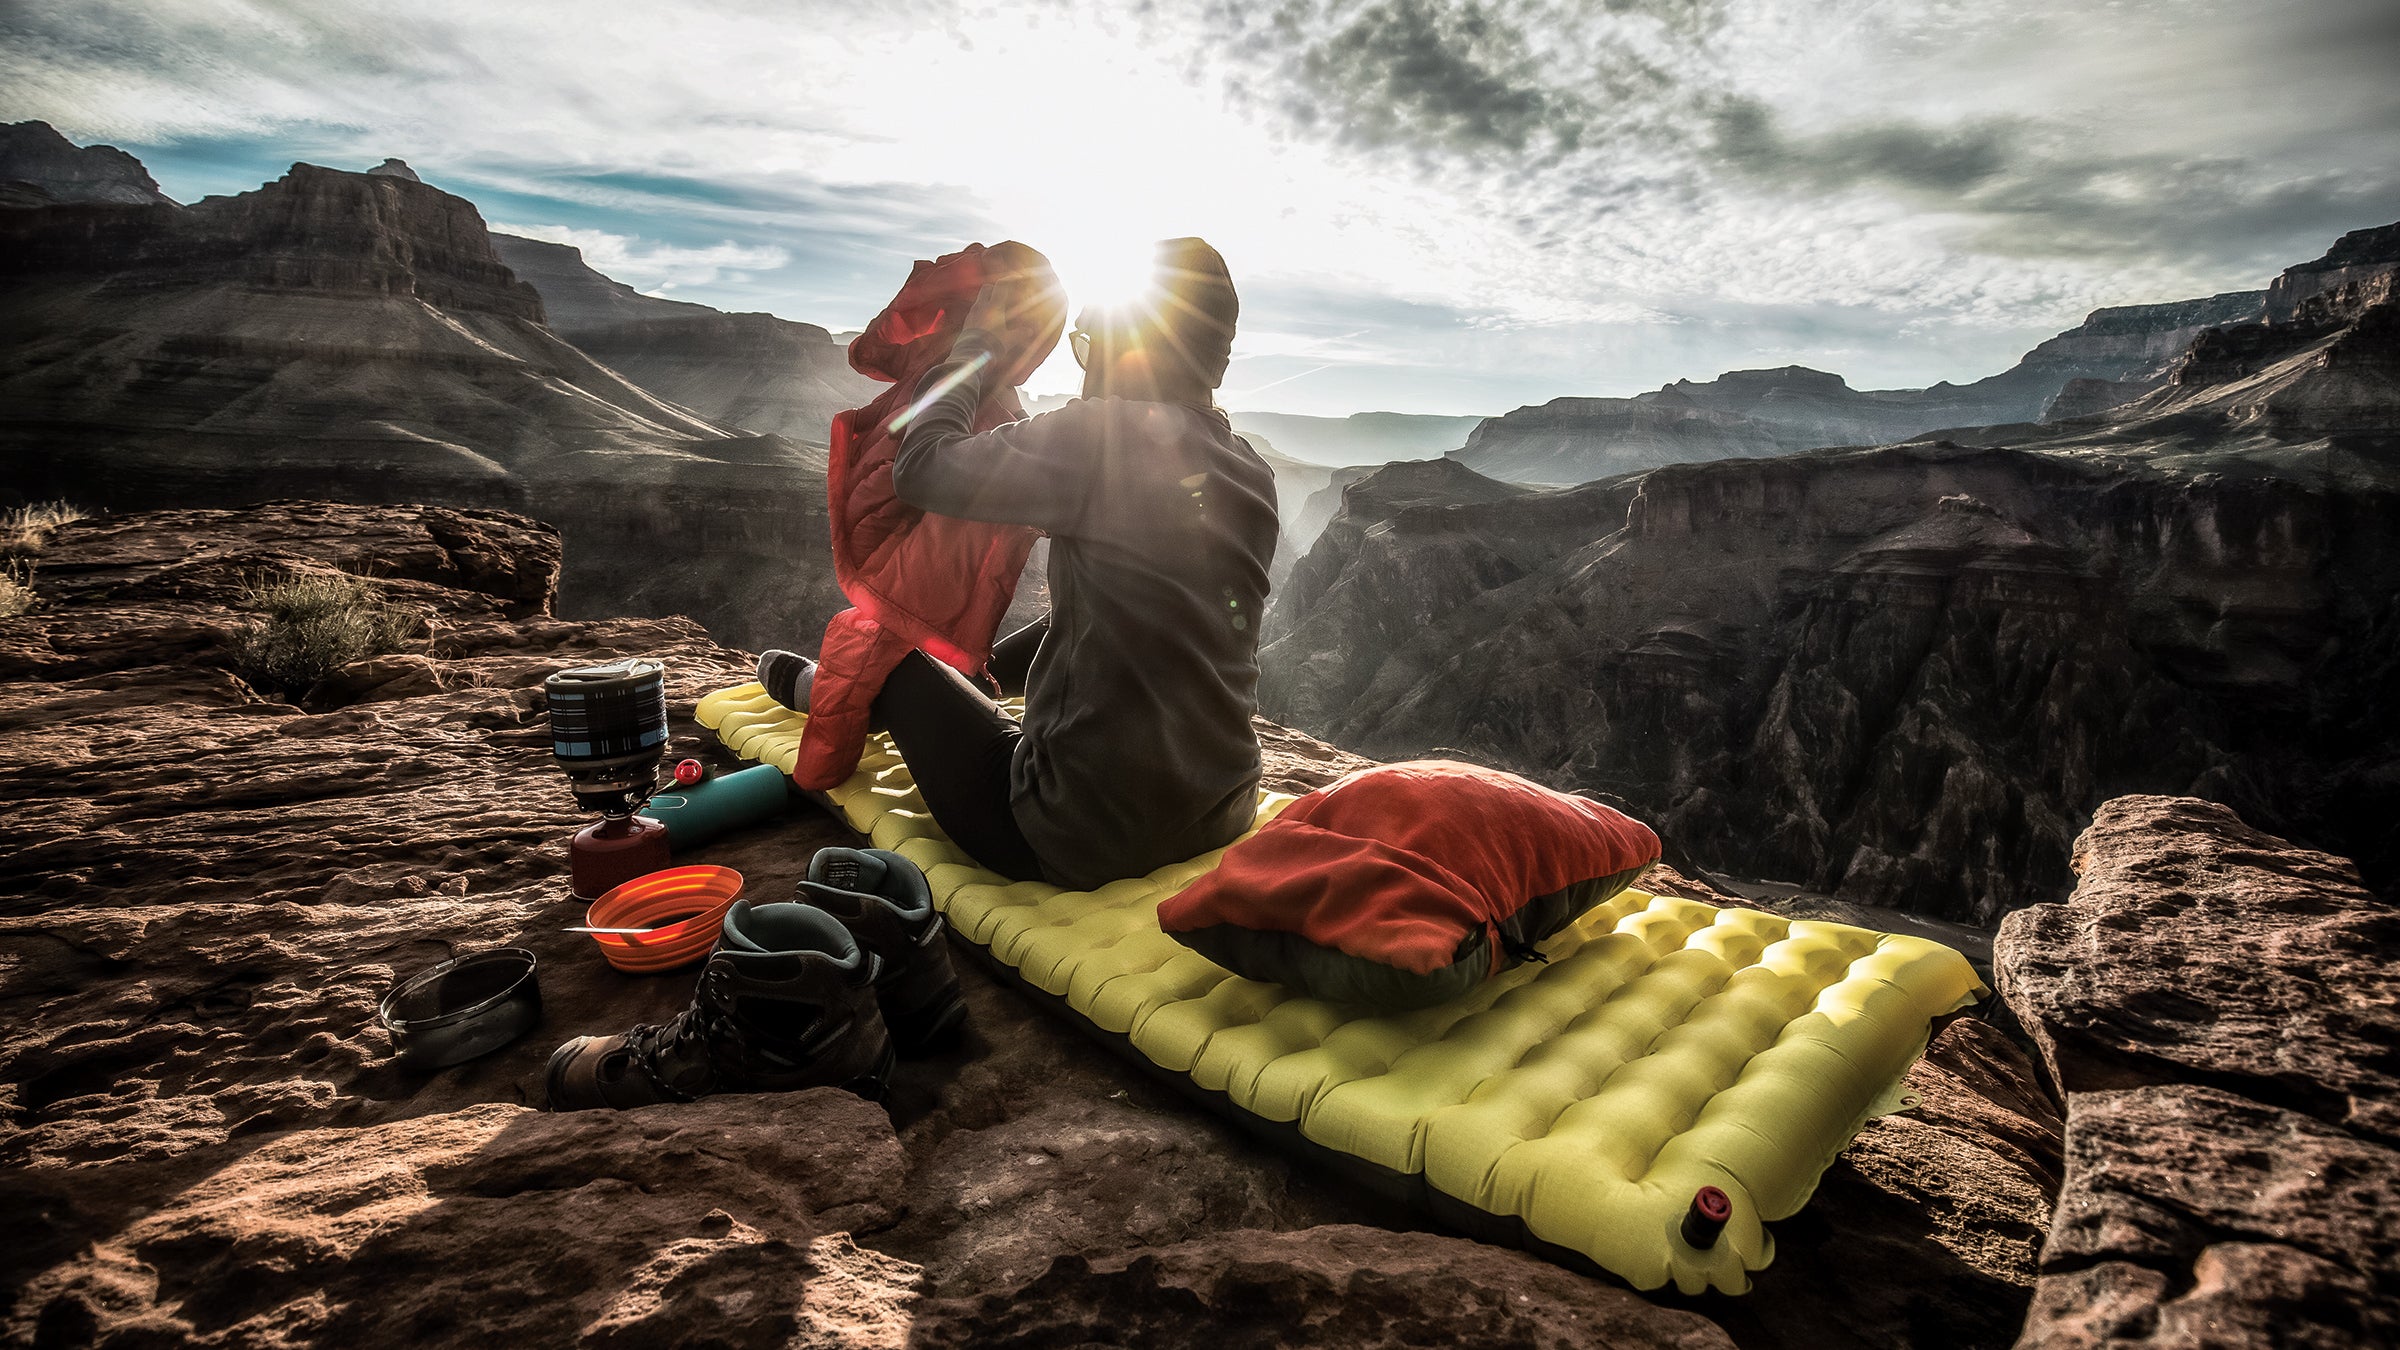 What We Wear on a Day Hike: Gear Guide - Oceanus Adventure